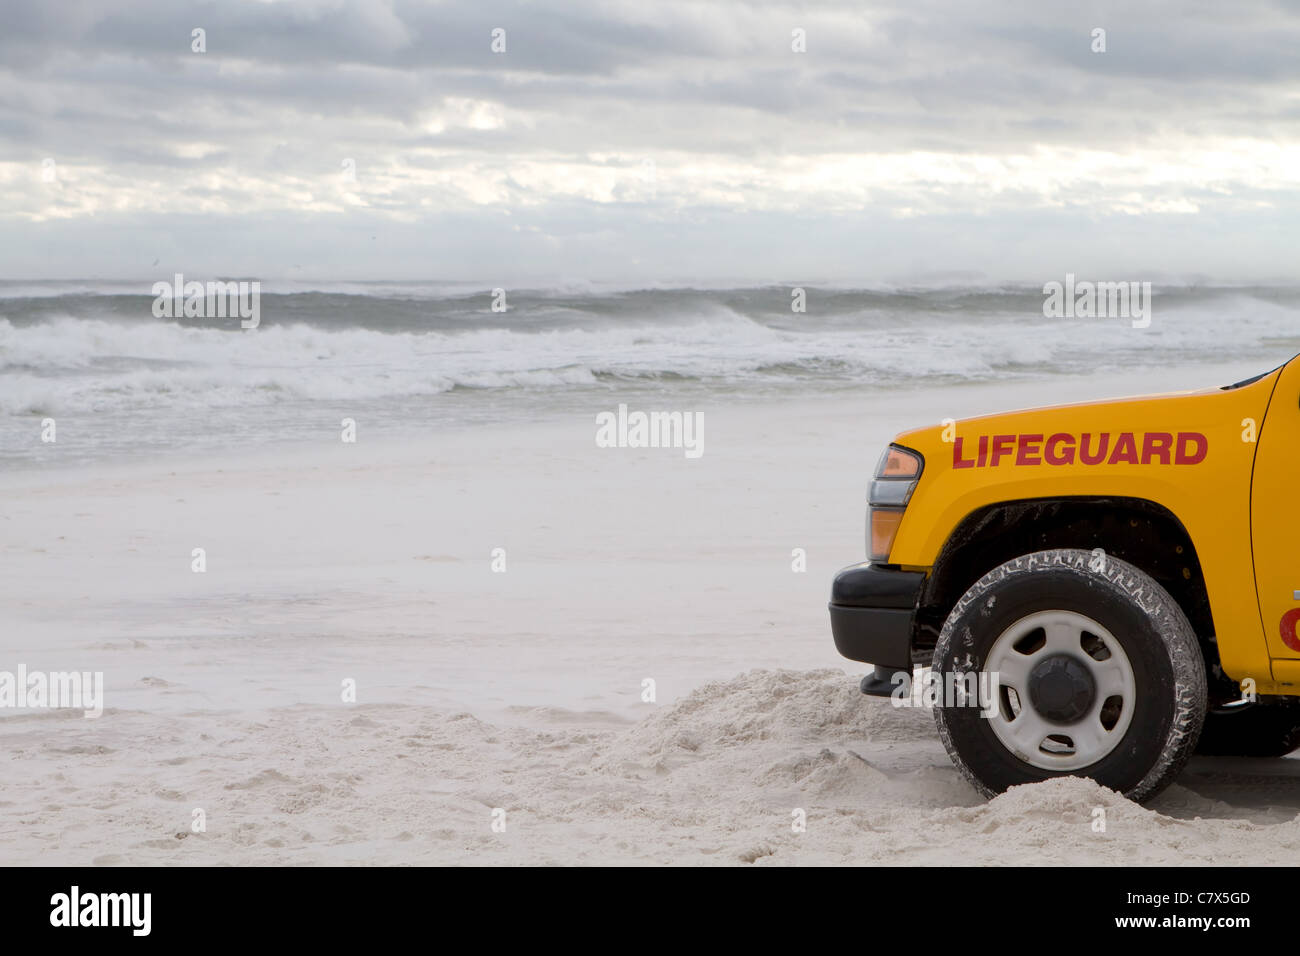 Lifeguard truck is parked on the beach as tropical storm generated waves come ashore to warn swimmers about the dangerous surf. Stock Photo